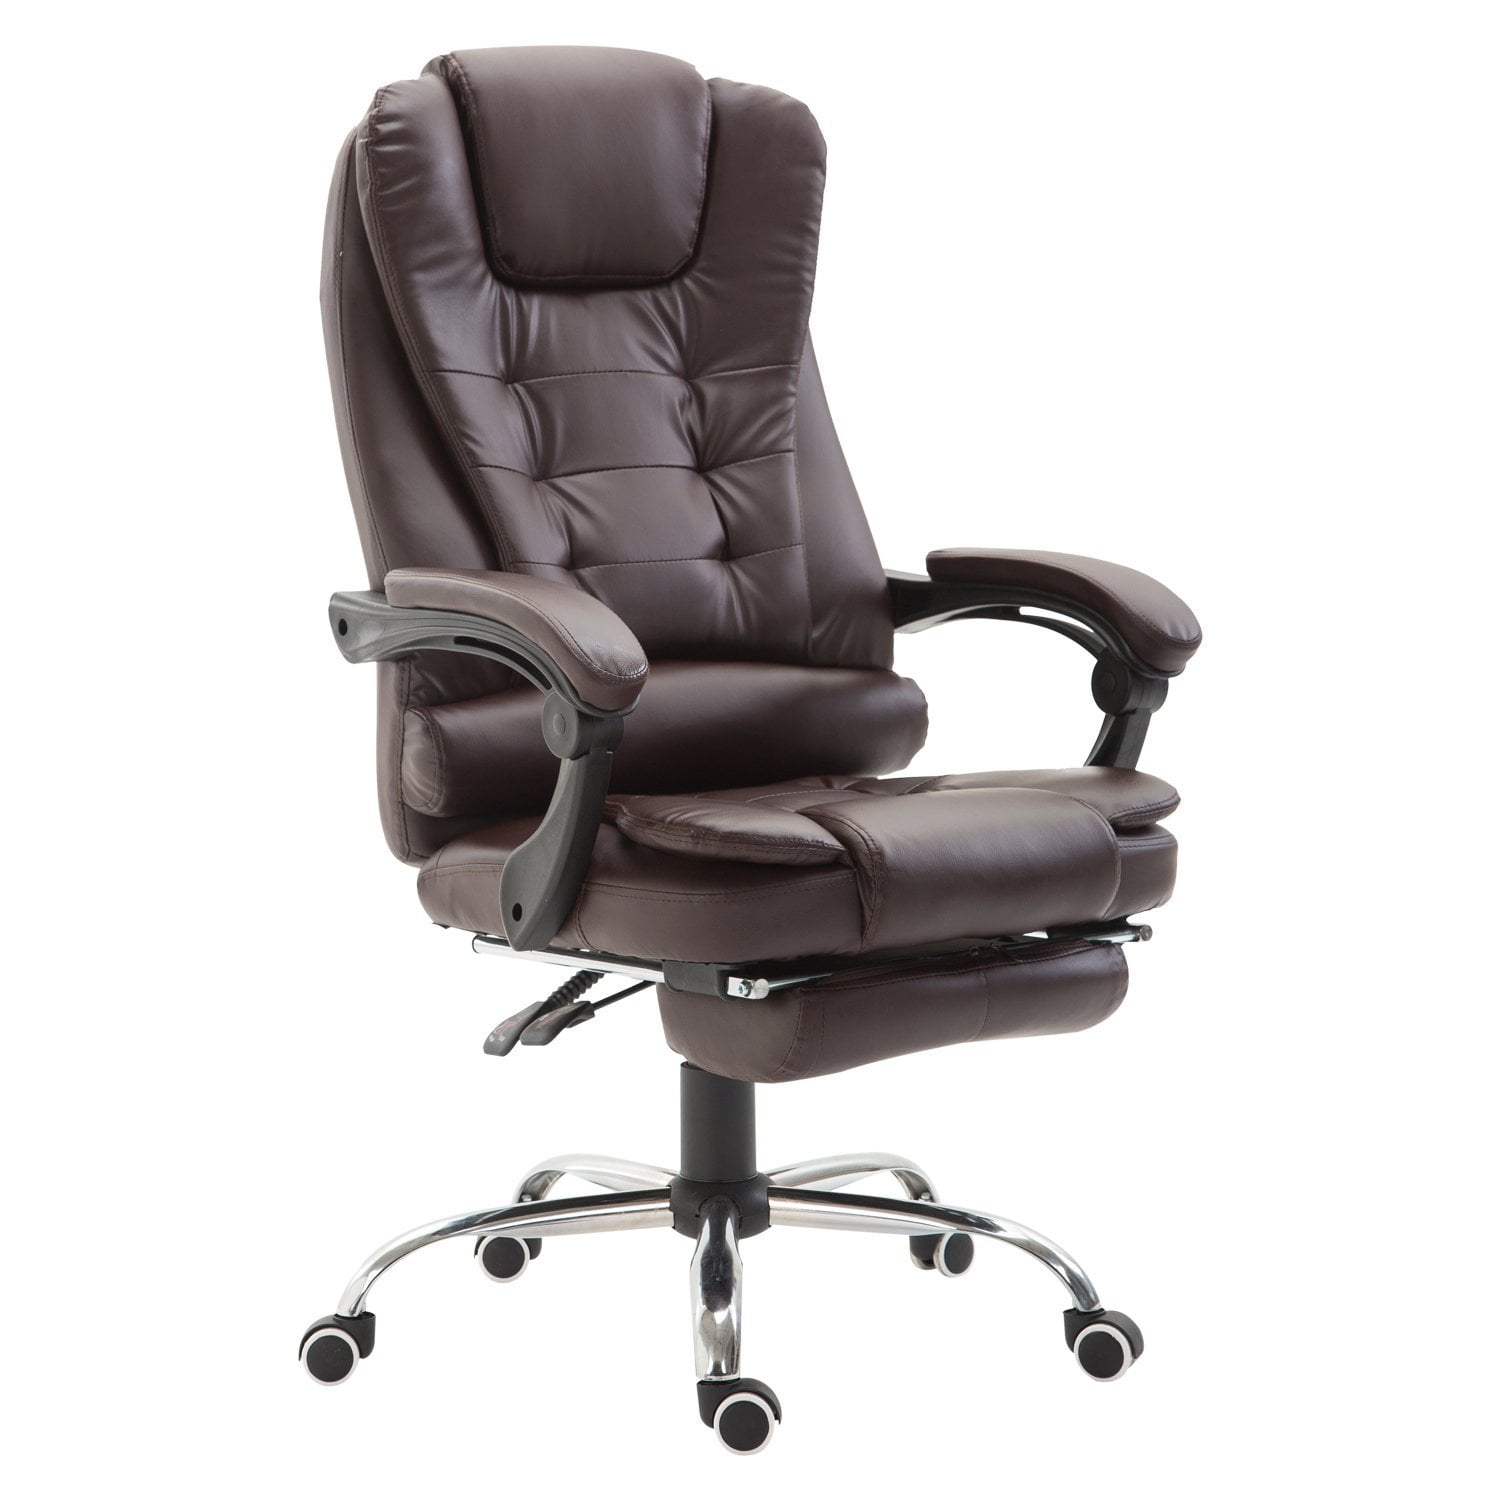 High Back Reclining PU Leather Executive Office